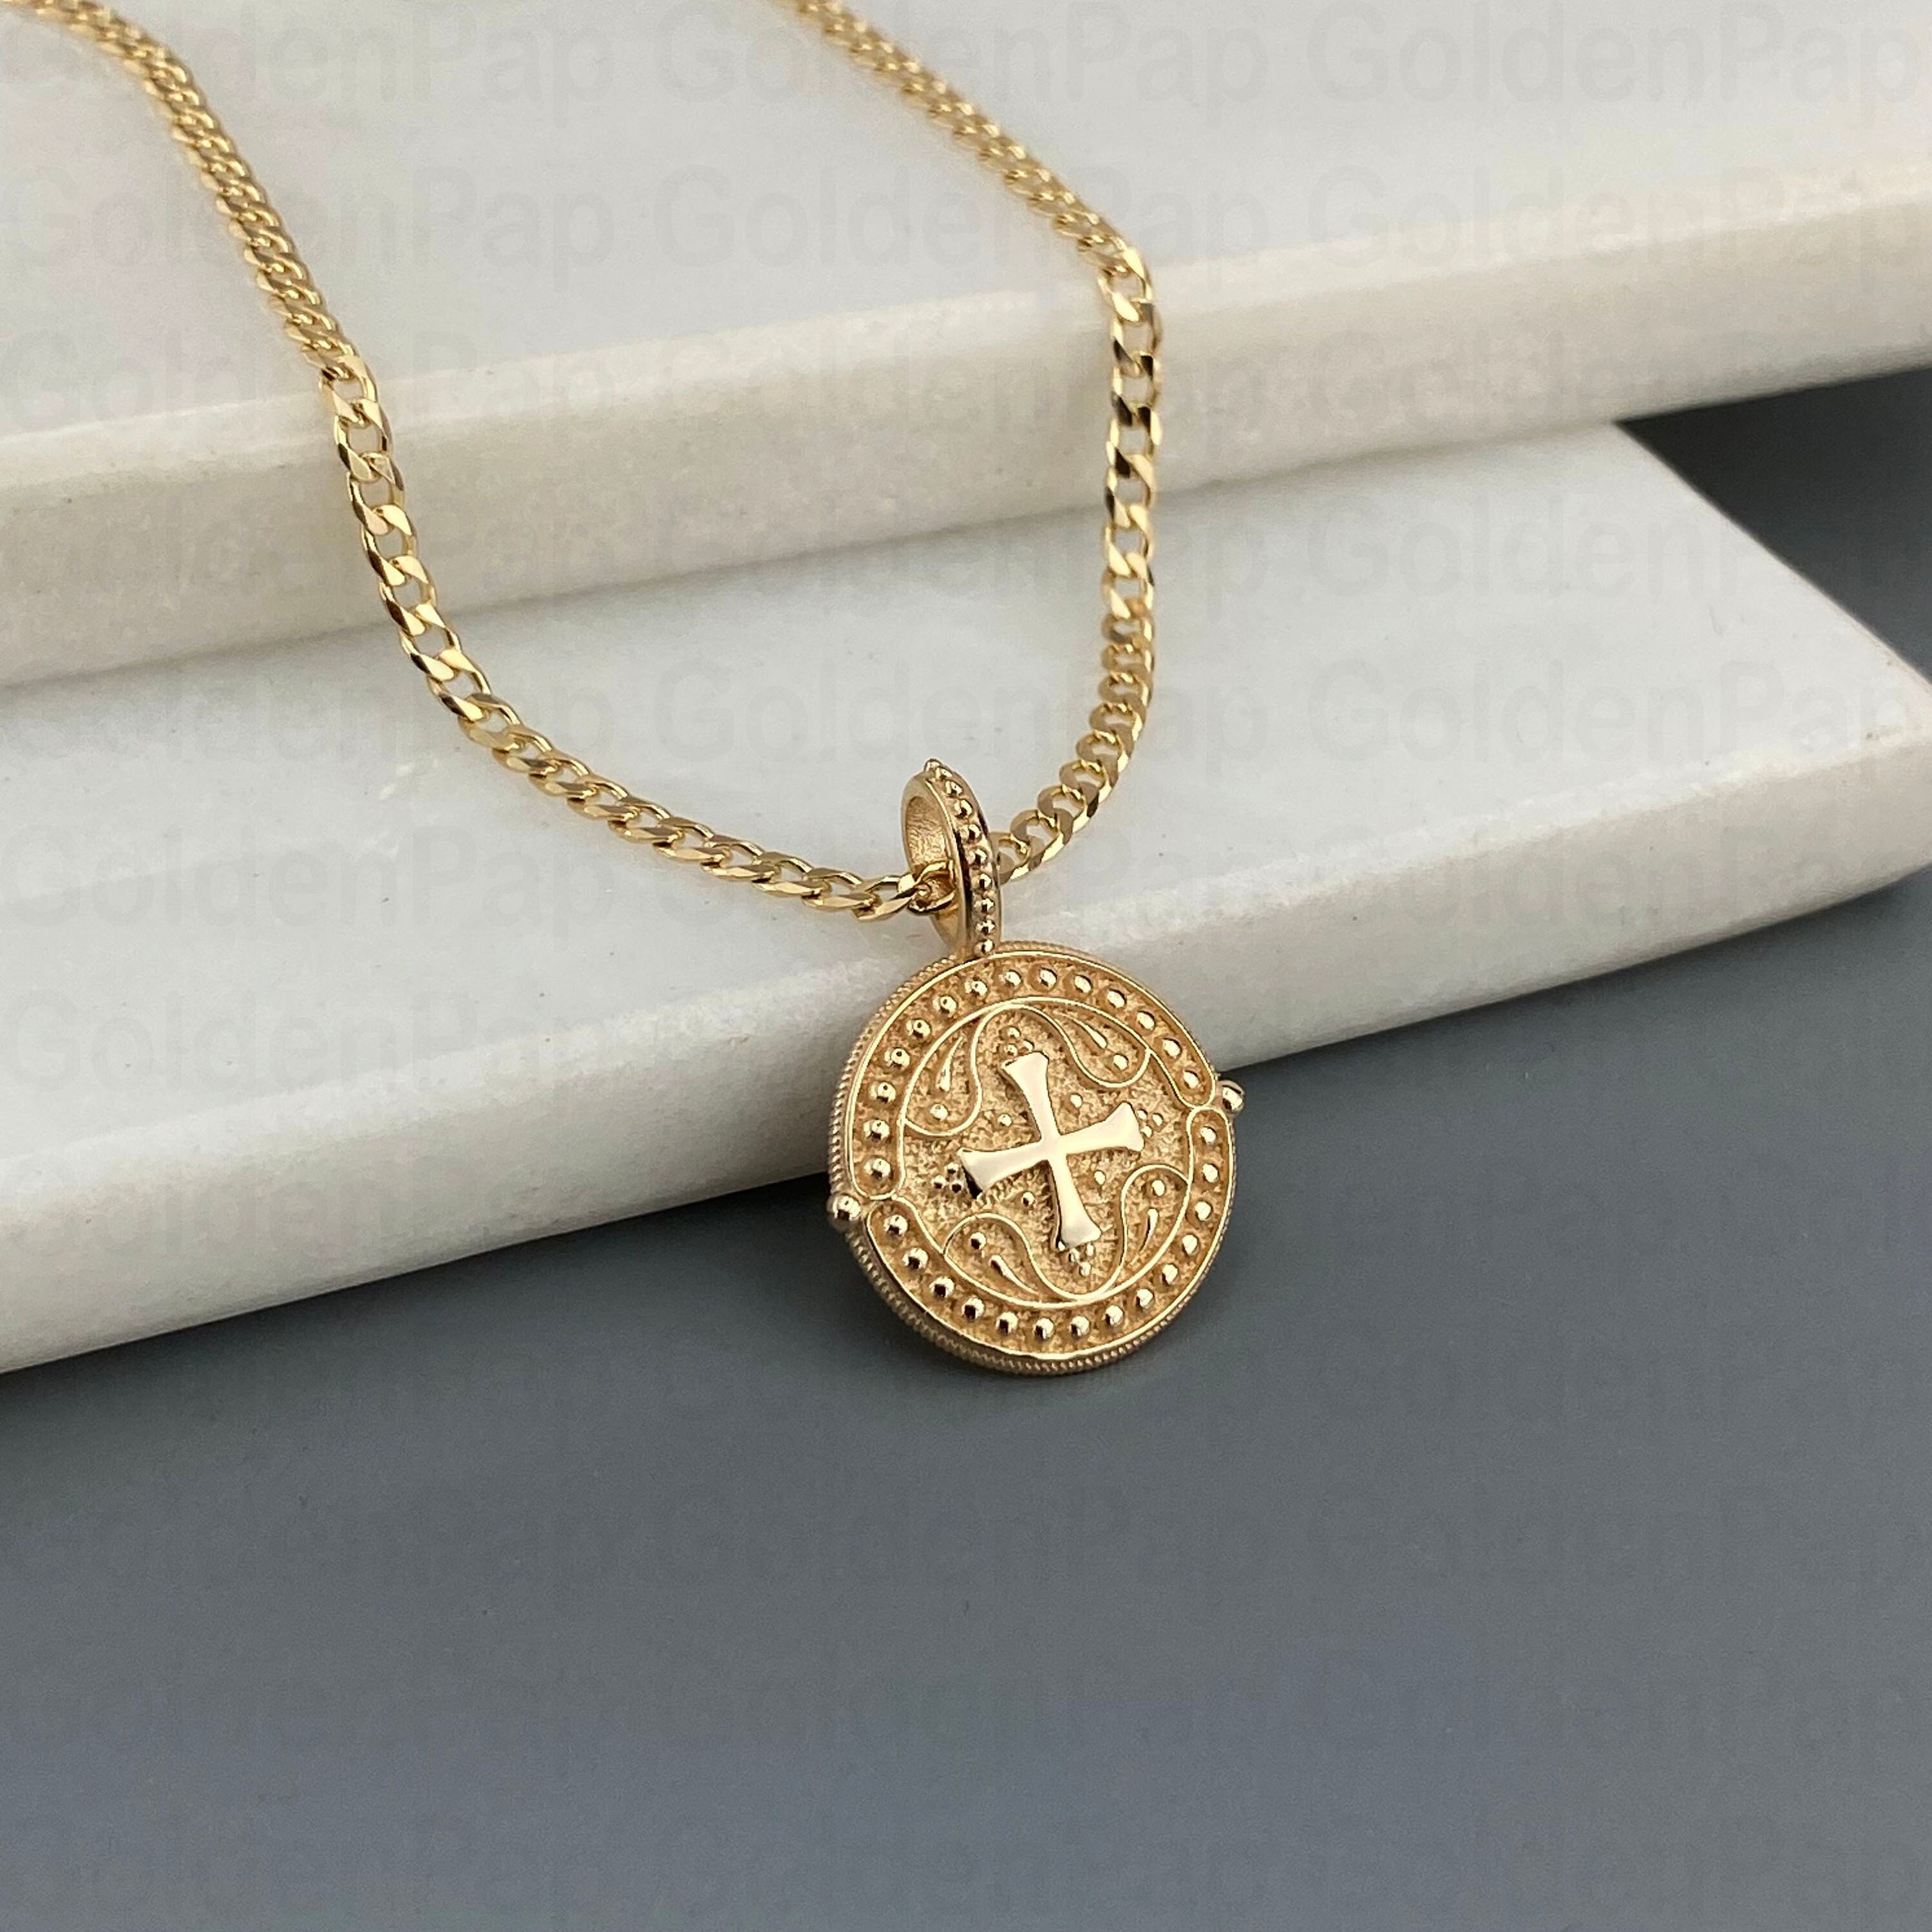 k Solid Gold Pendant Religious Pendant With Cross   Etsy